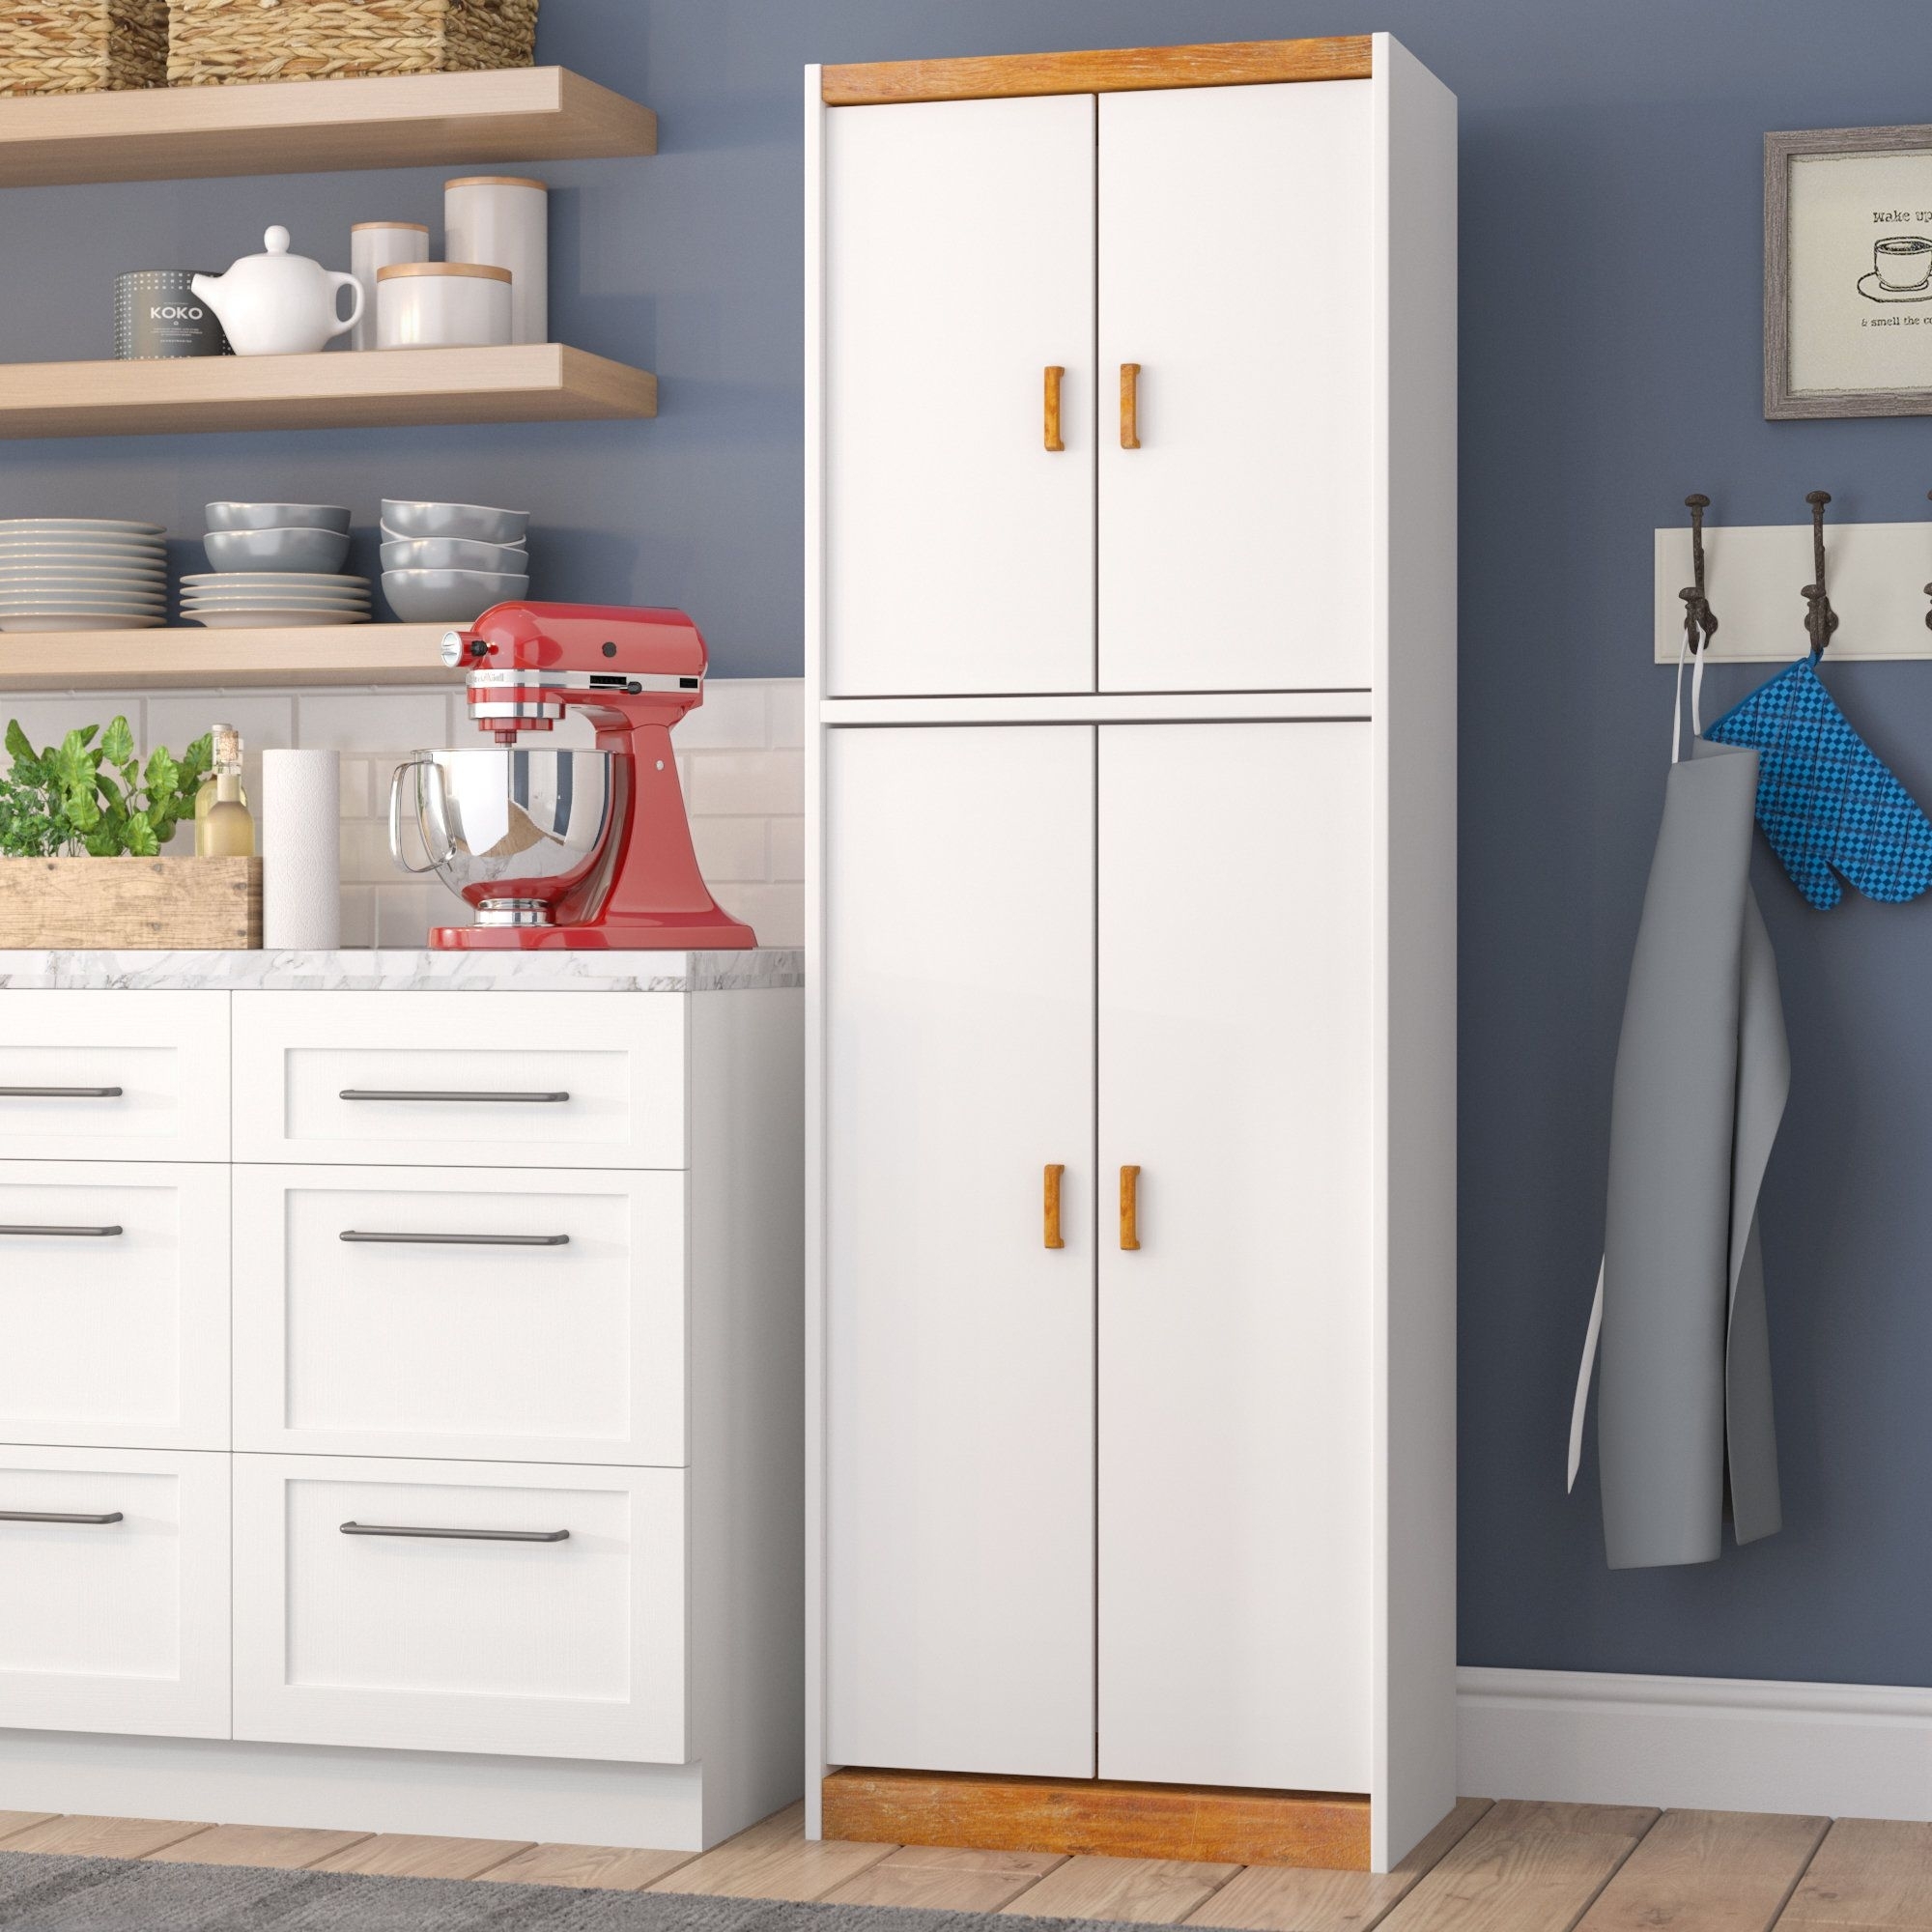 Slim Pantry Cabinets - Foter  Narrow cabinet kitchen, Small remodel, Narrow  pantry